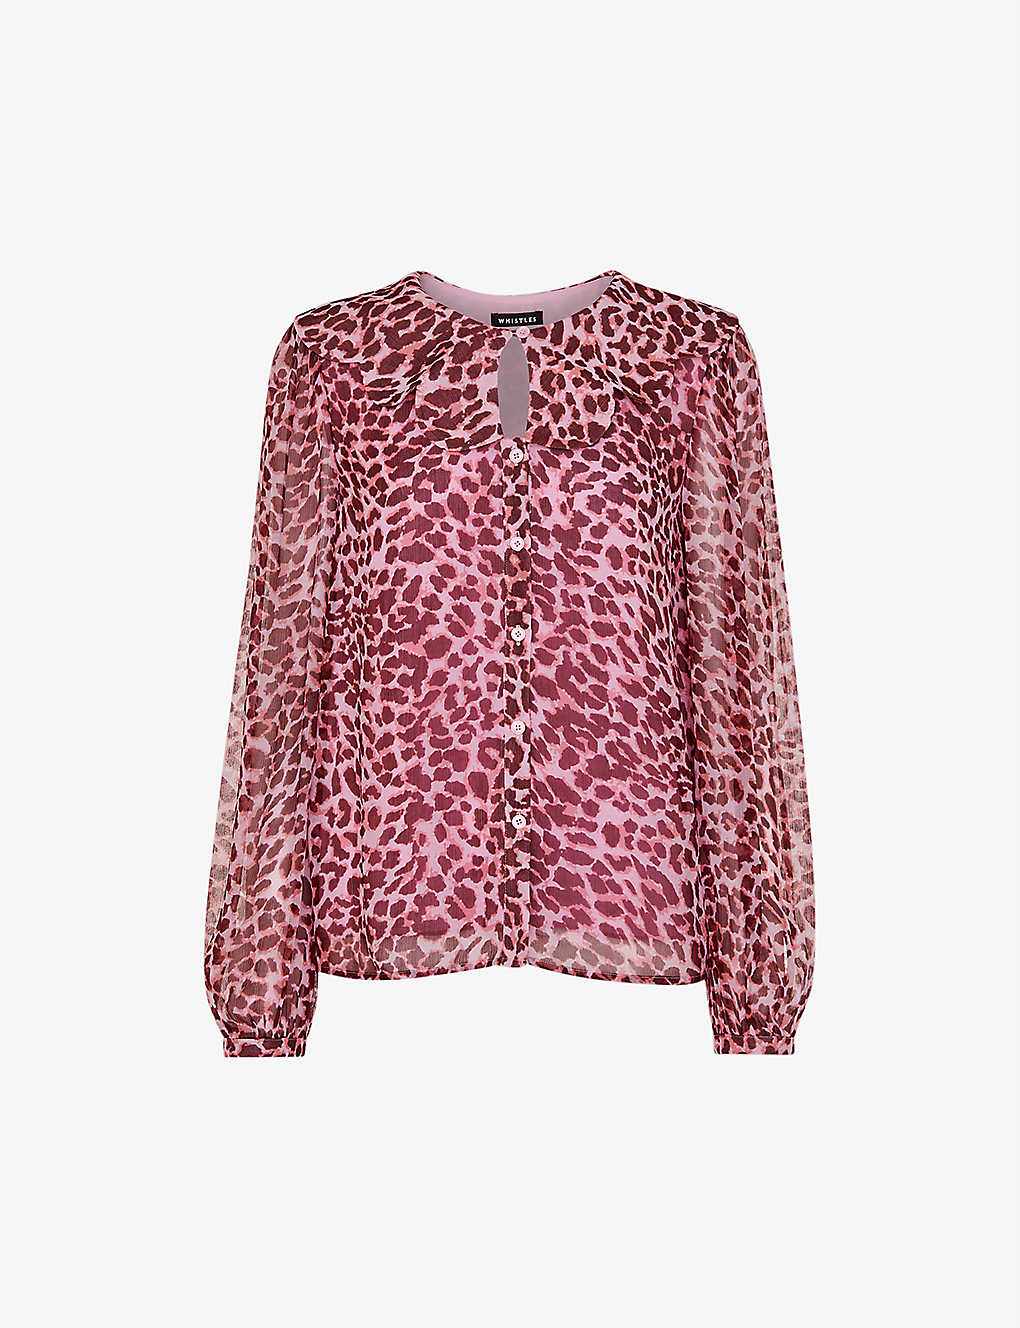 Whistles Scalloped Collar Leopard Print Blouse In Multi-coloured